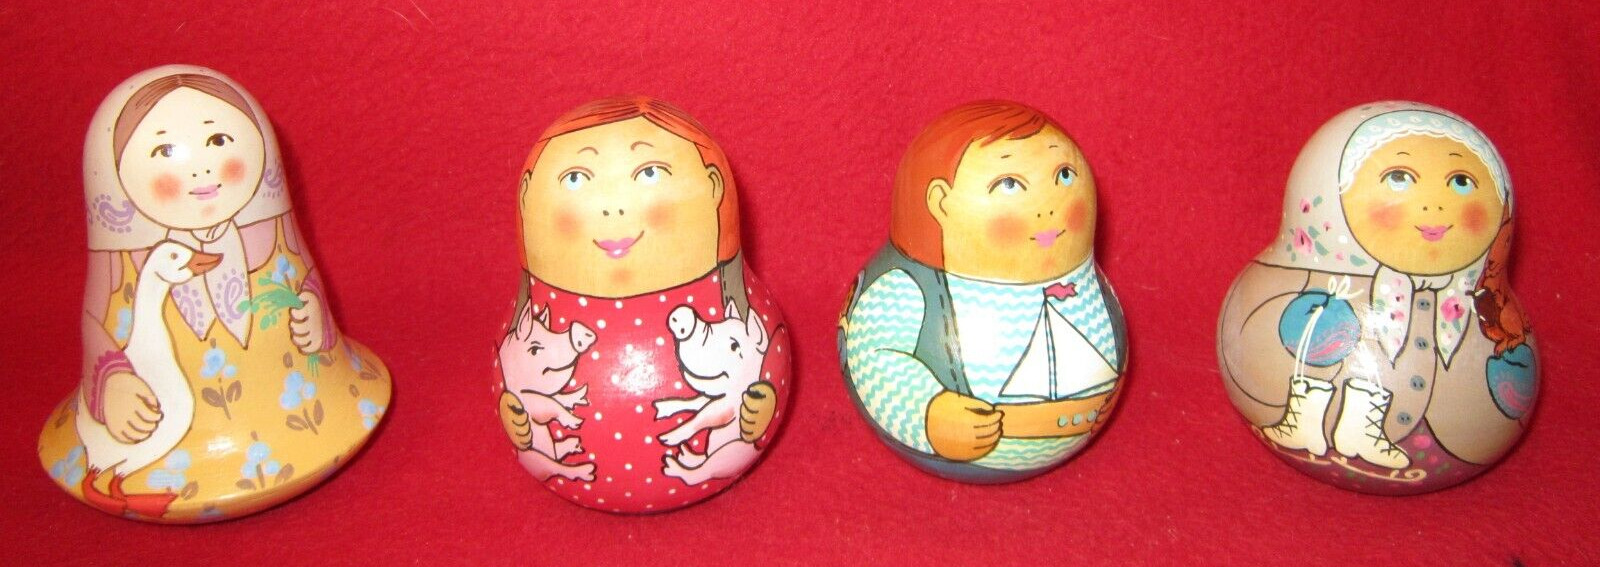 4 Artist Signed Hand Painted Russian Matryoshka Wood Roly Poly Chime Bell Dolls